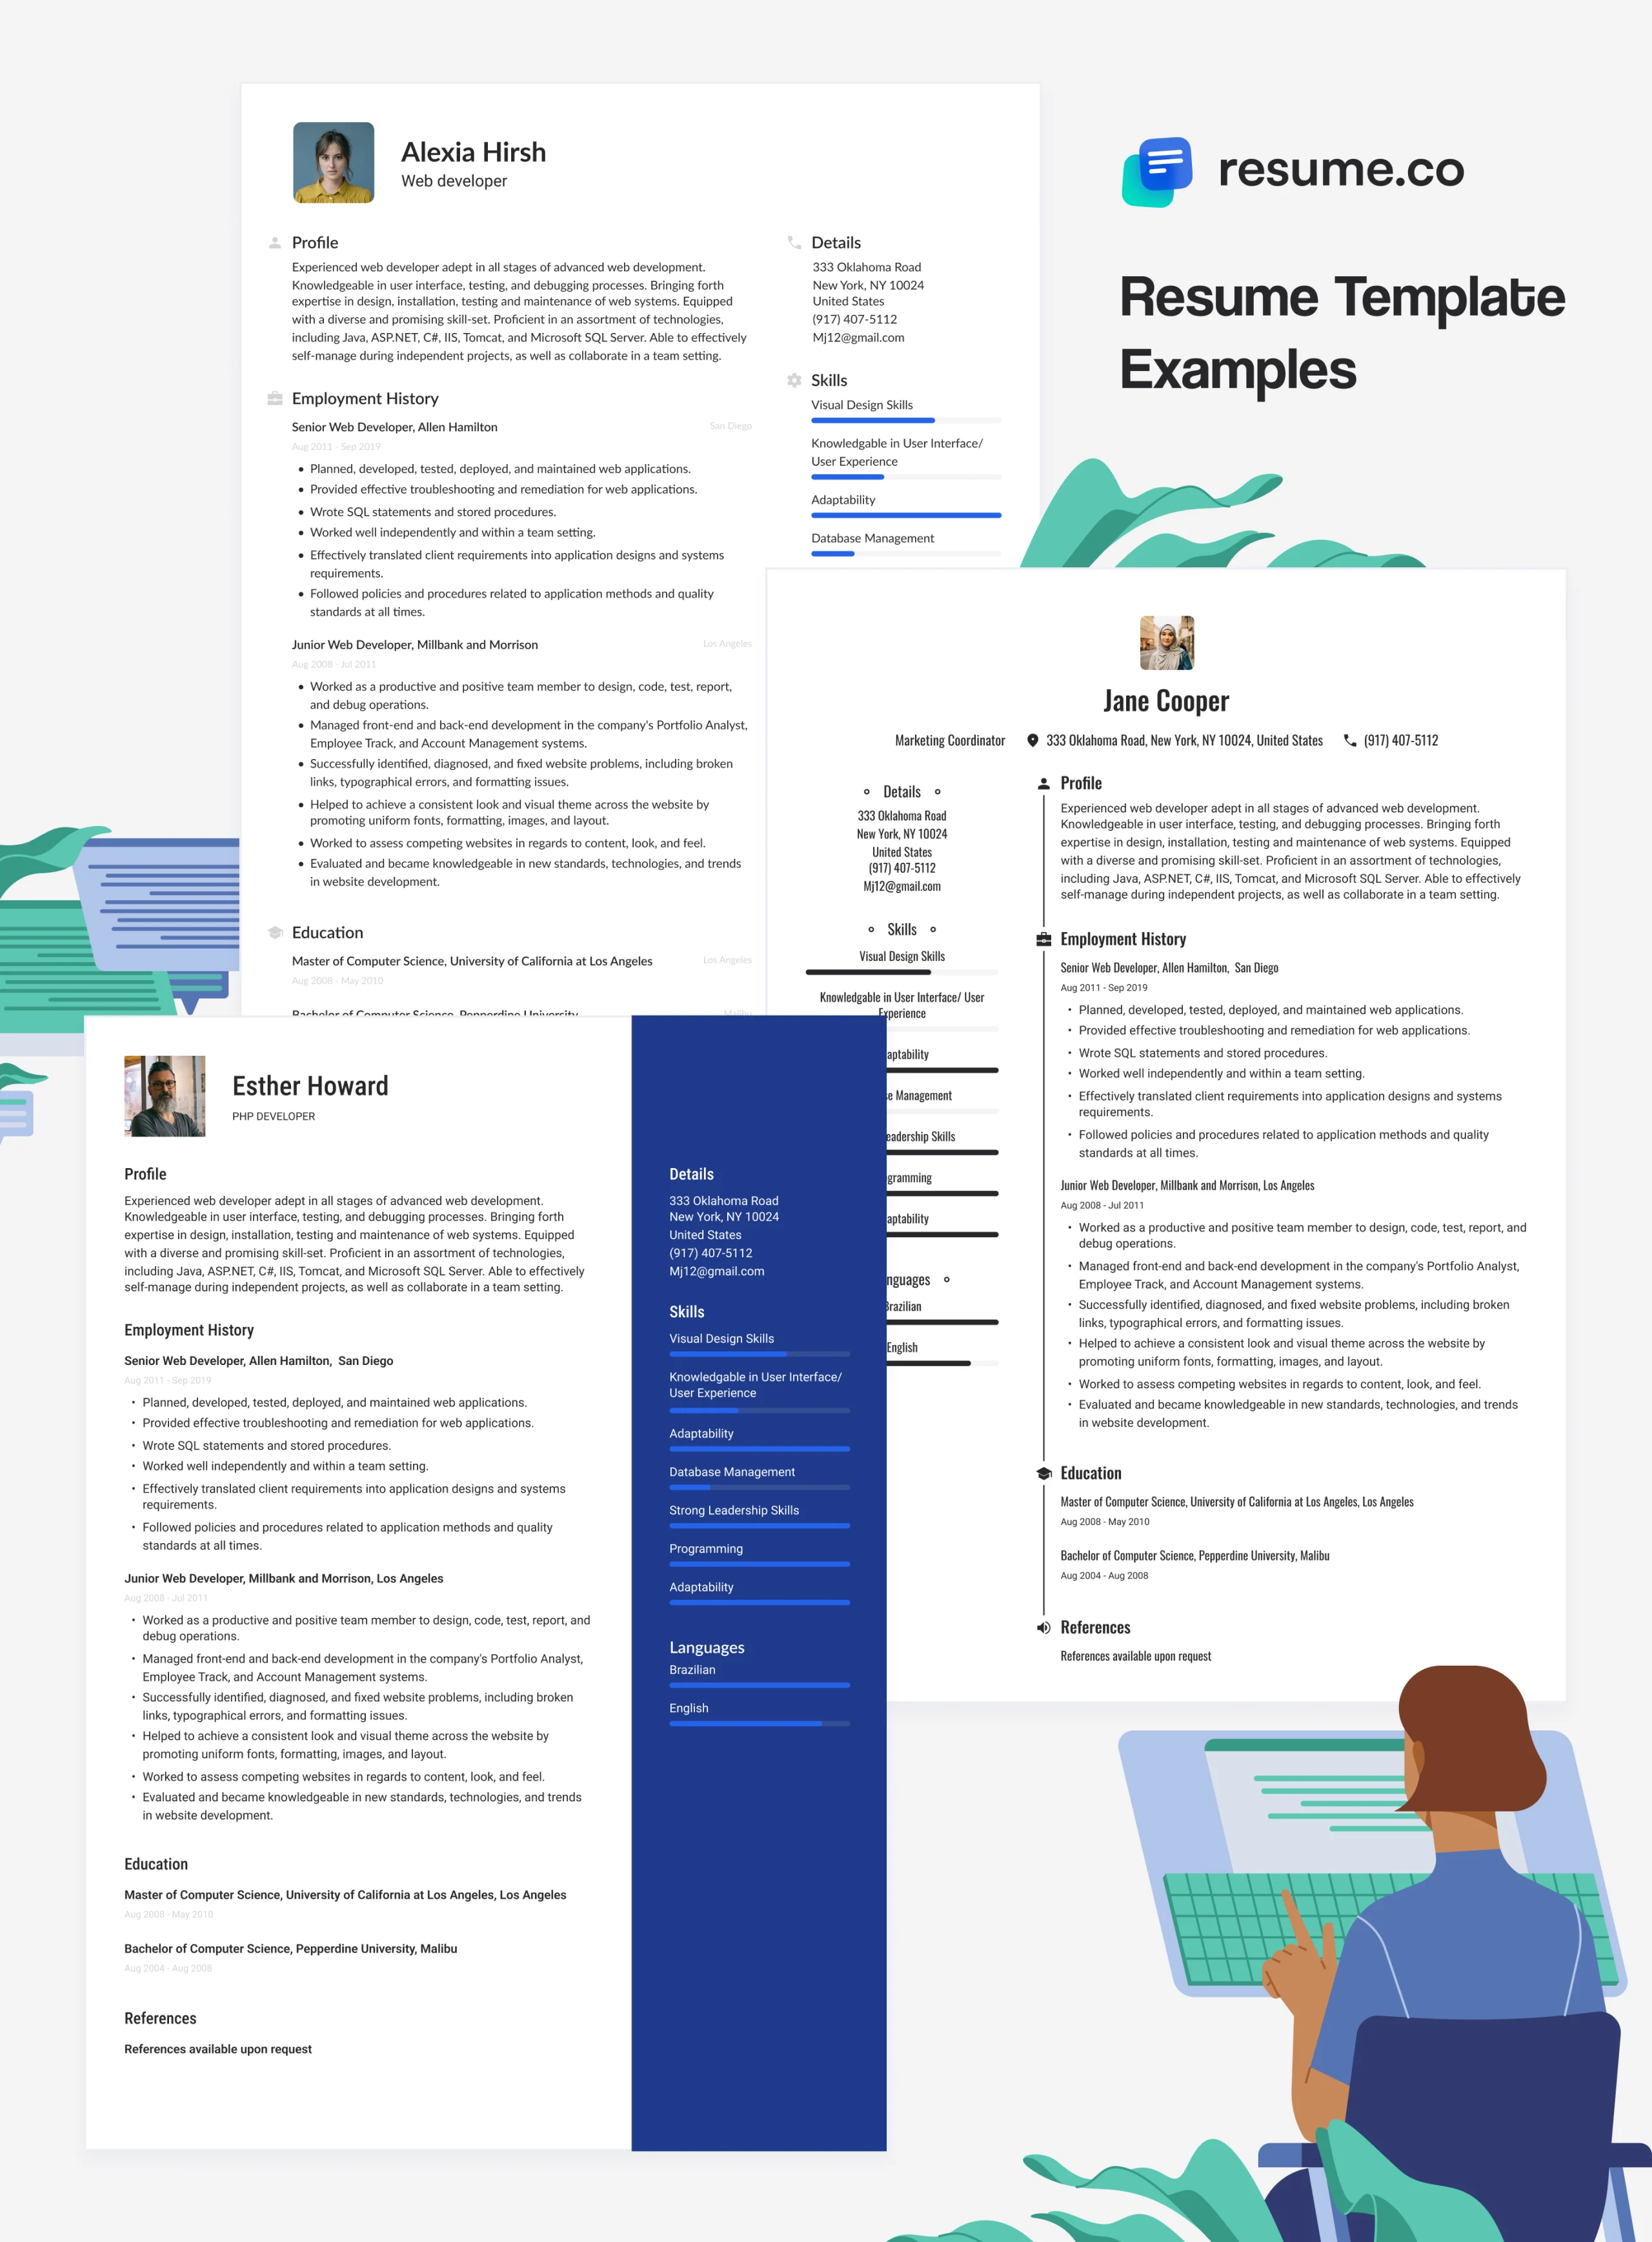 Resume template examples